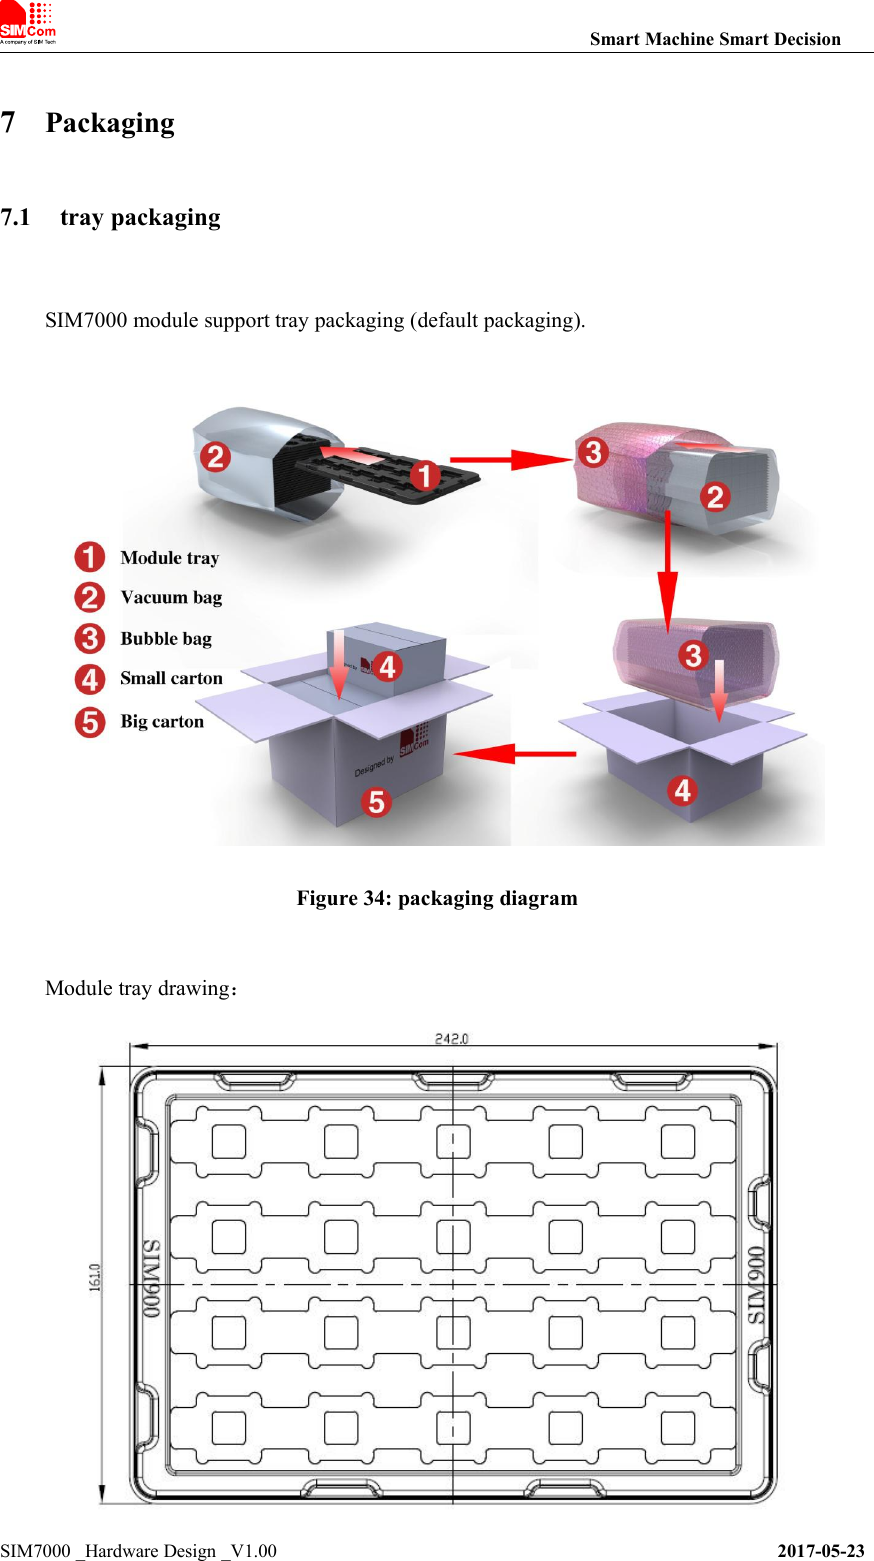 Smart Machine Smart DecisionSIM7000 _Hardware Design _V1.00 2017-05-237Packaging7.1 tray packagingSIM7000 module support tray packaging (default packaging).Figure 34: packaging diagramModule tray drawing：